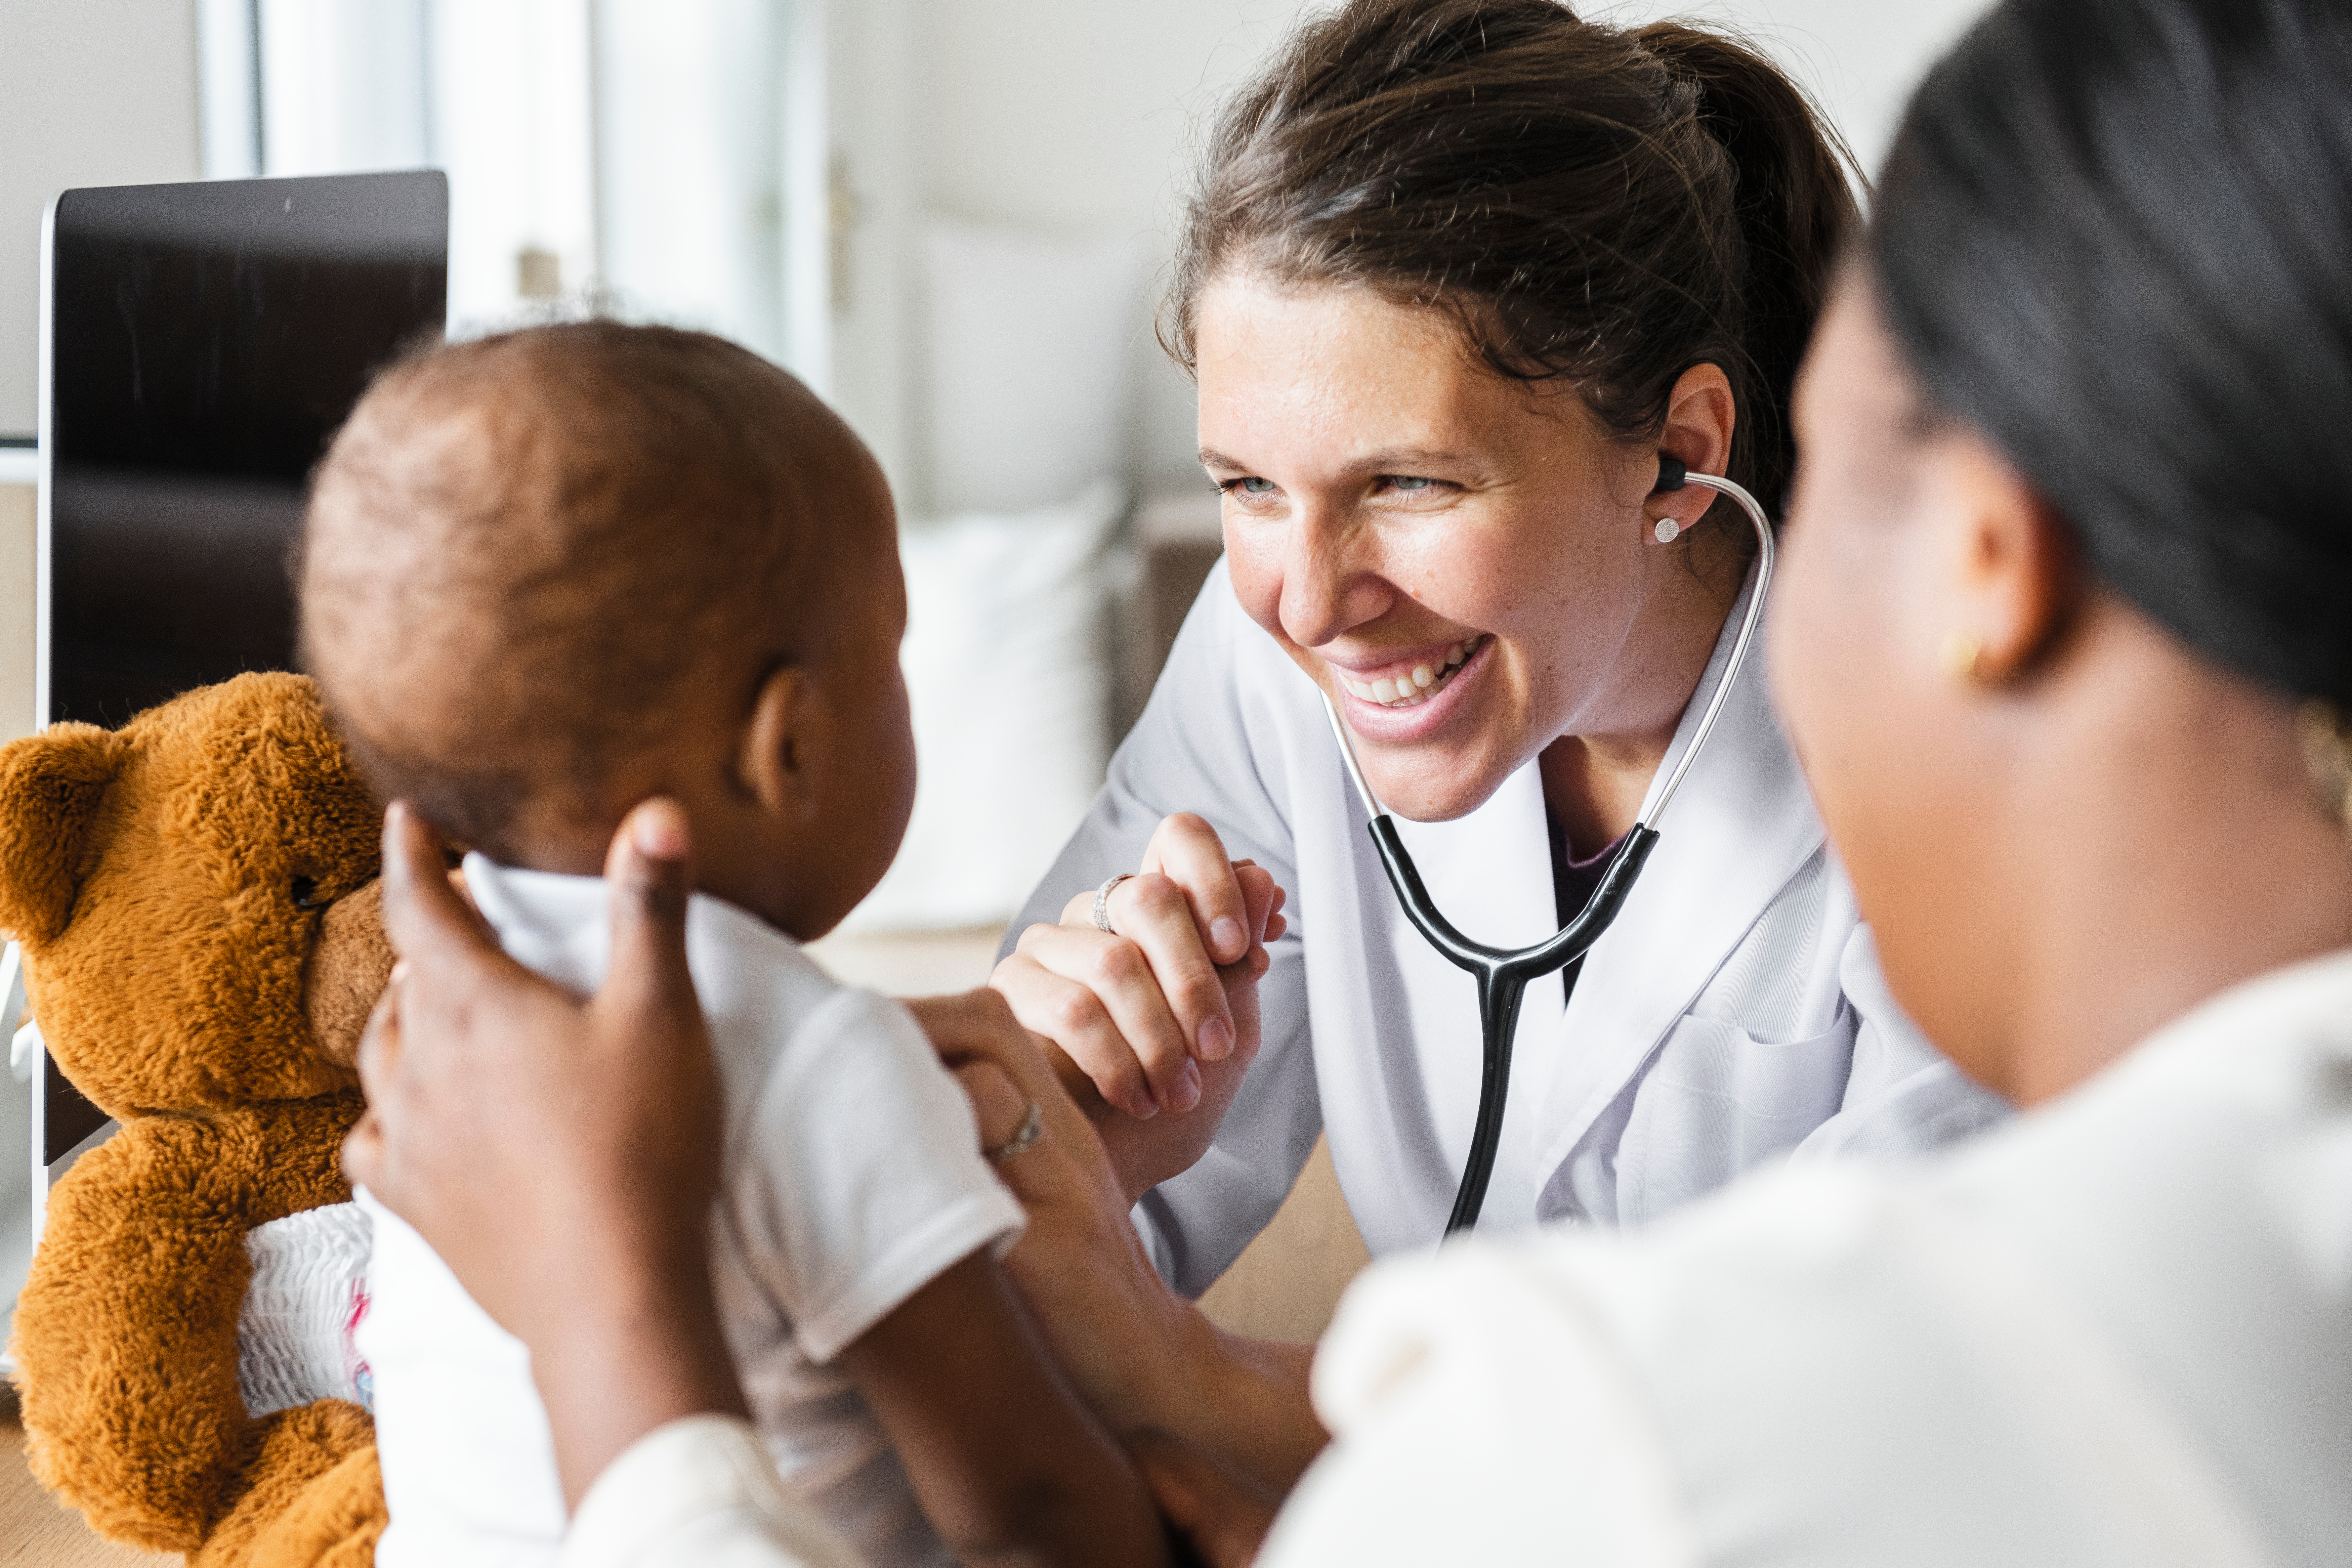 Find the right, expert pediatric care provider for your children's physical, emotional and social health throughout every stage of their young lives.